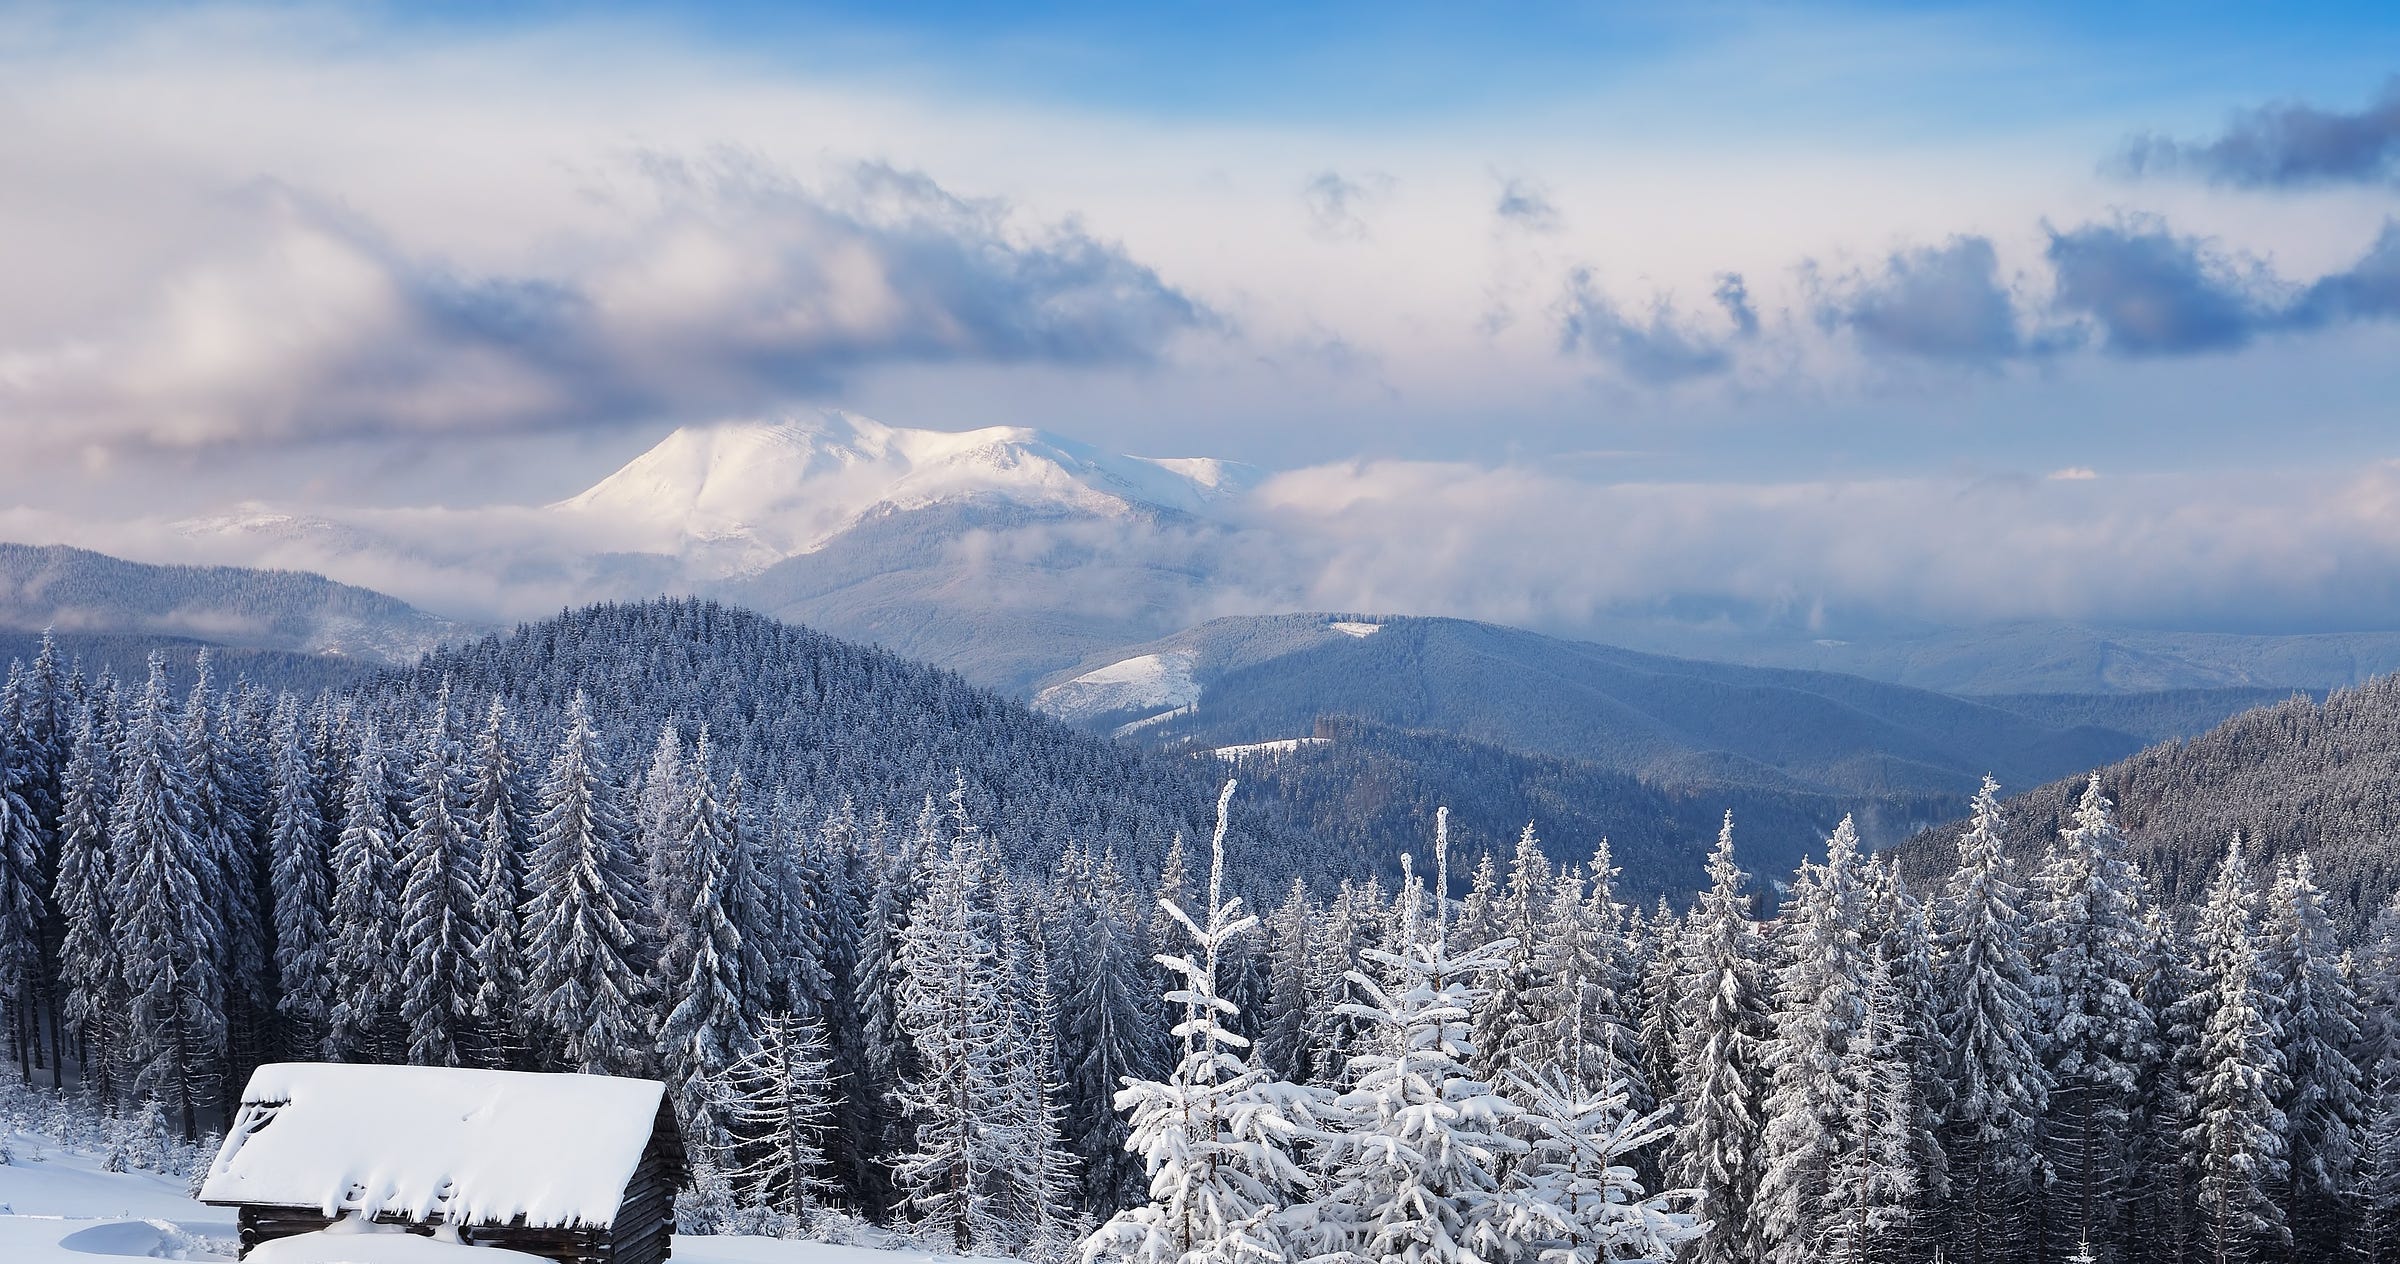 Winter view of forest and mountains. From the story "Let Yourself Die" by Ray Catania Author